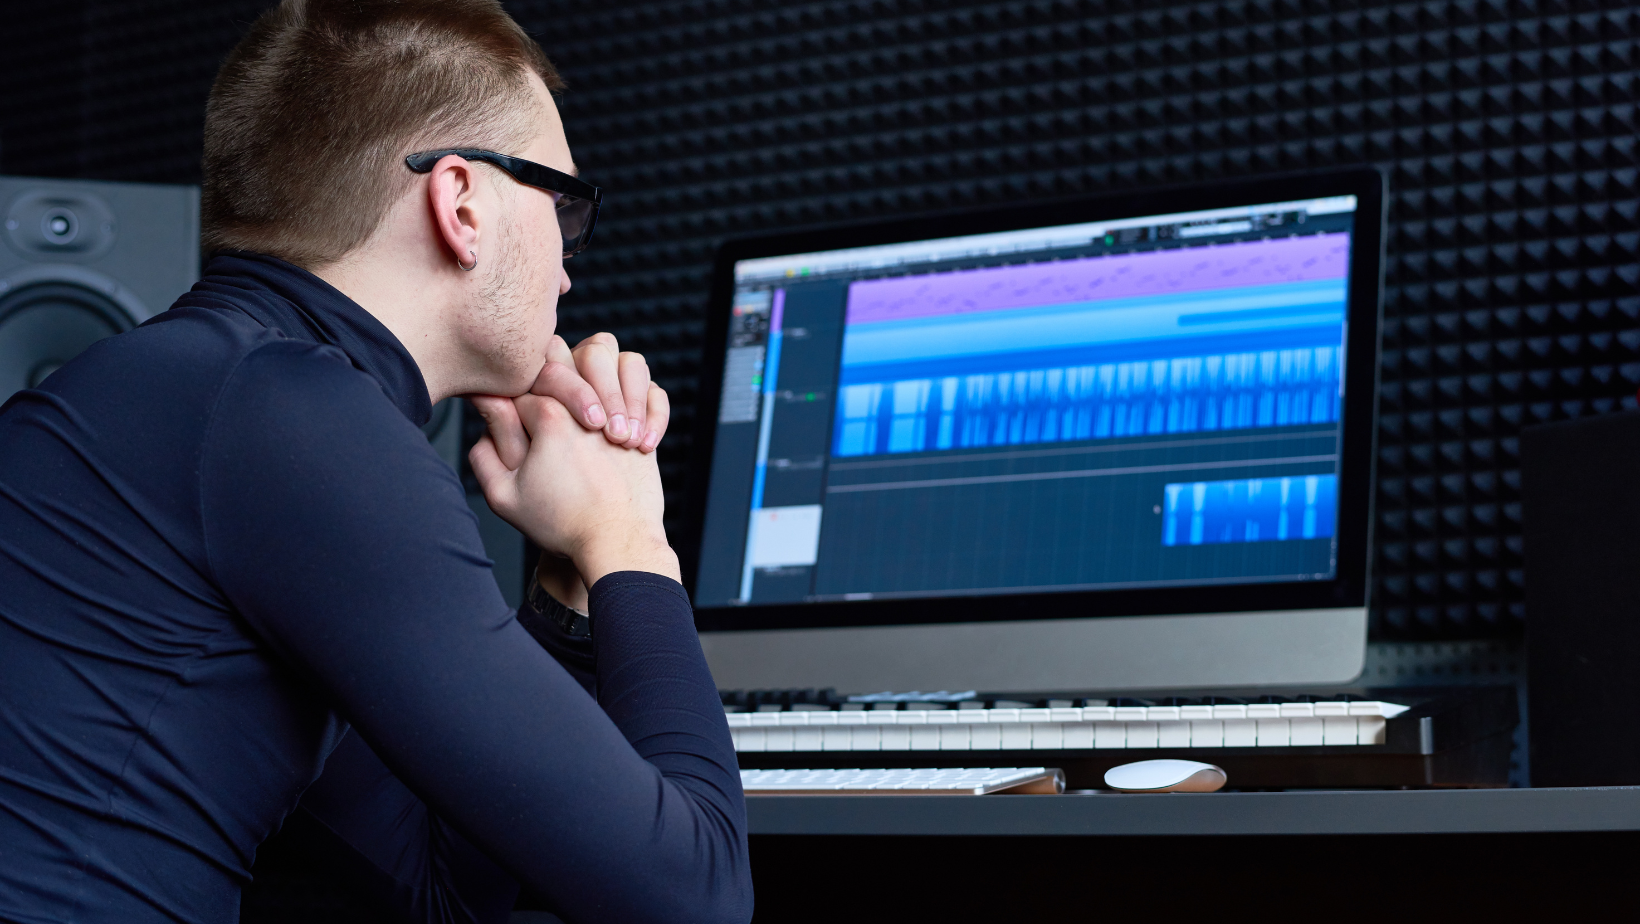 Which Type of Software Would be Best to Create Individual Audio Tracks With Virtual Instruments?